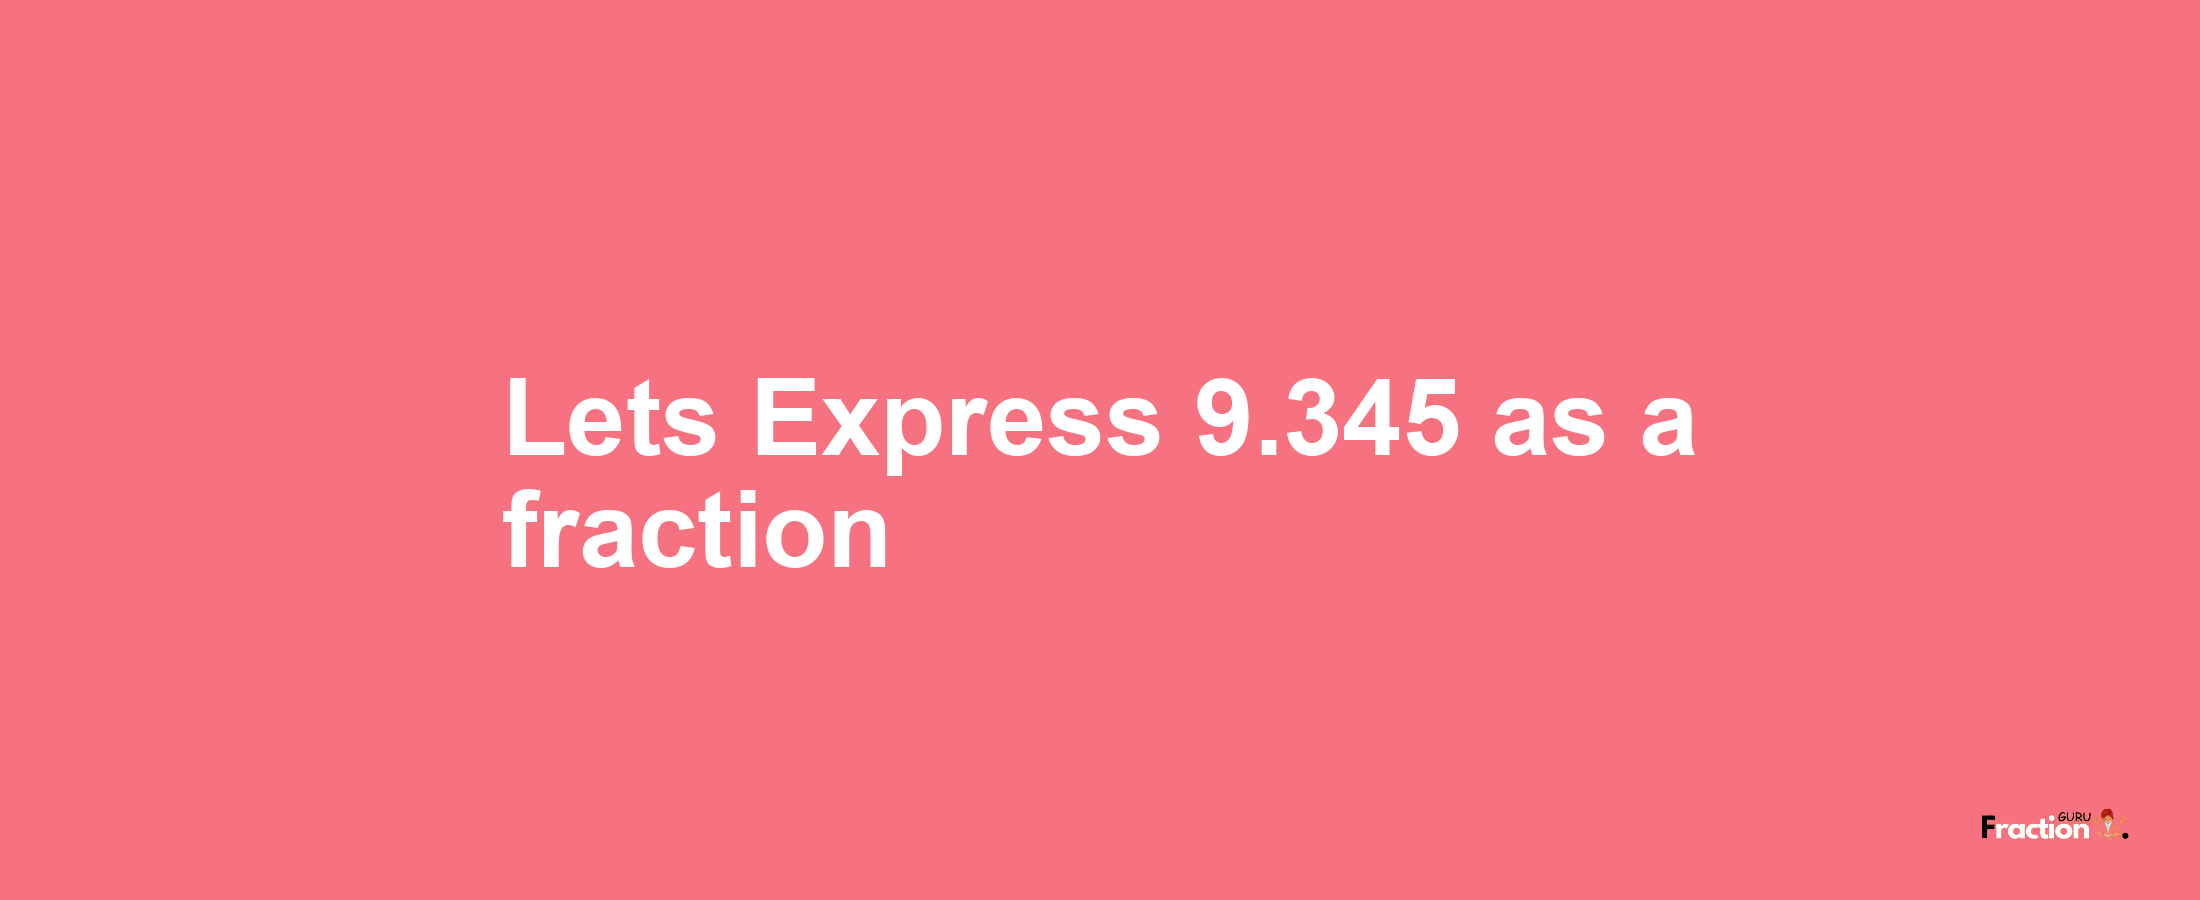 Lets Express 9.345 as afraction